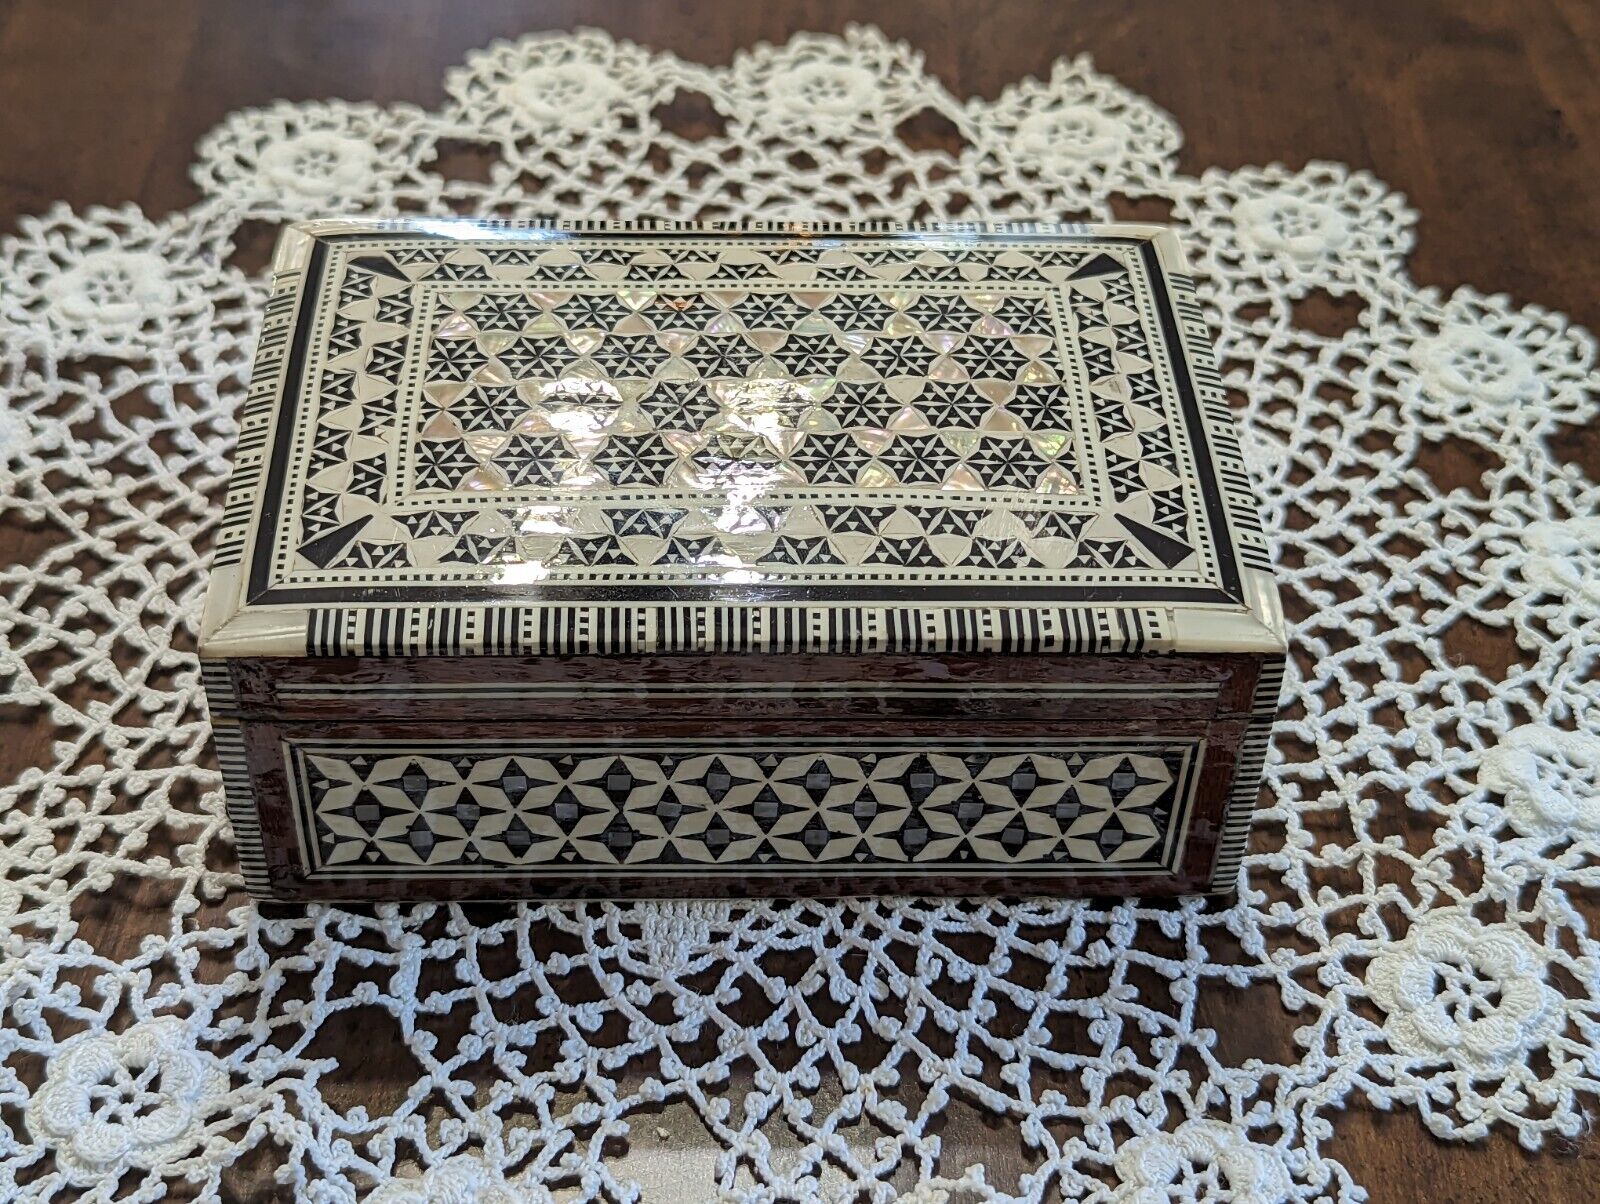 PRETTY Handmade Mother of Pearls INLAID 5.5" long Wooden Box made in Egypt,  NEW